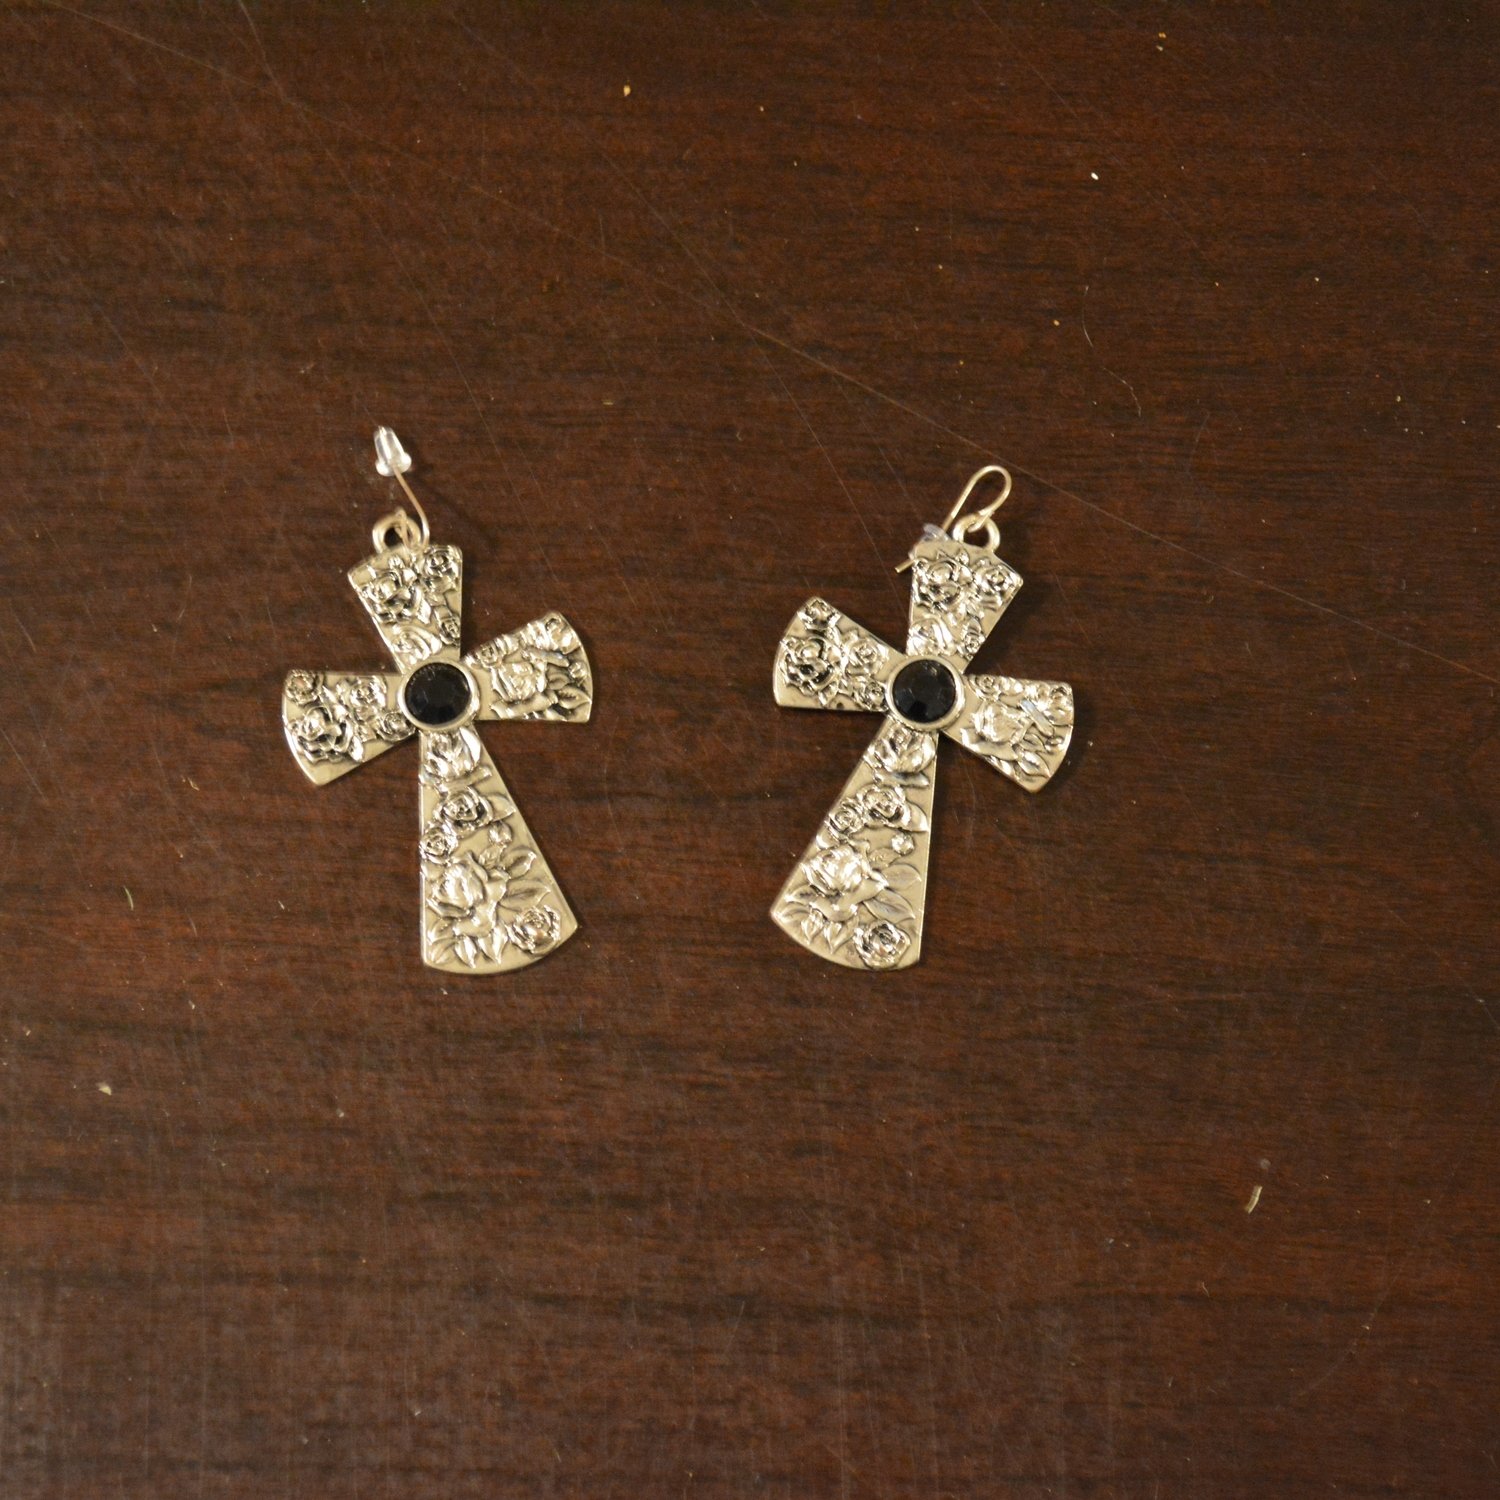 Silver and Black Cross Earrings with flowers